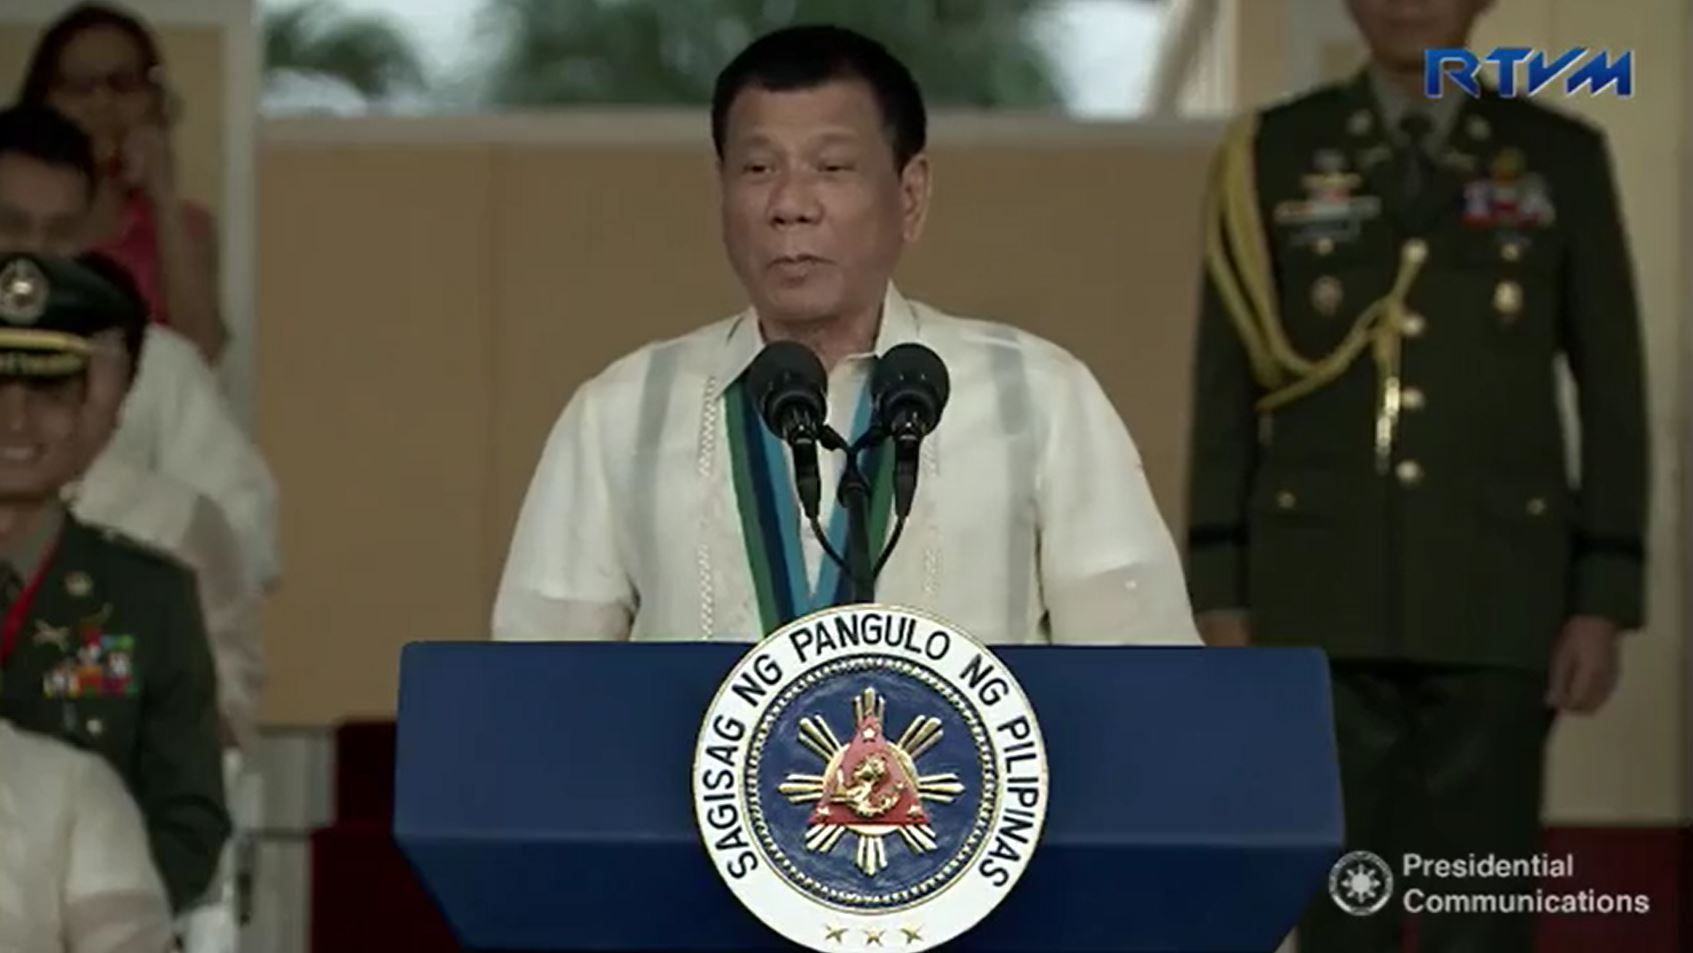 President Duterte offers a ceasefire this holiday season for members of rebel groups like the New People's Army (NPA), Moro National Liberation Front (MNLF), and Moro Islamic Liberation Front (MILF). (Photo grabbed from RTVM)